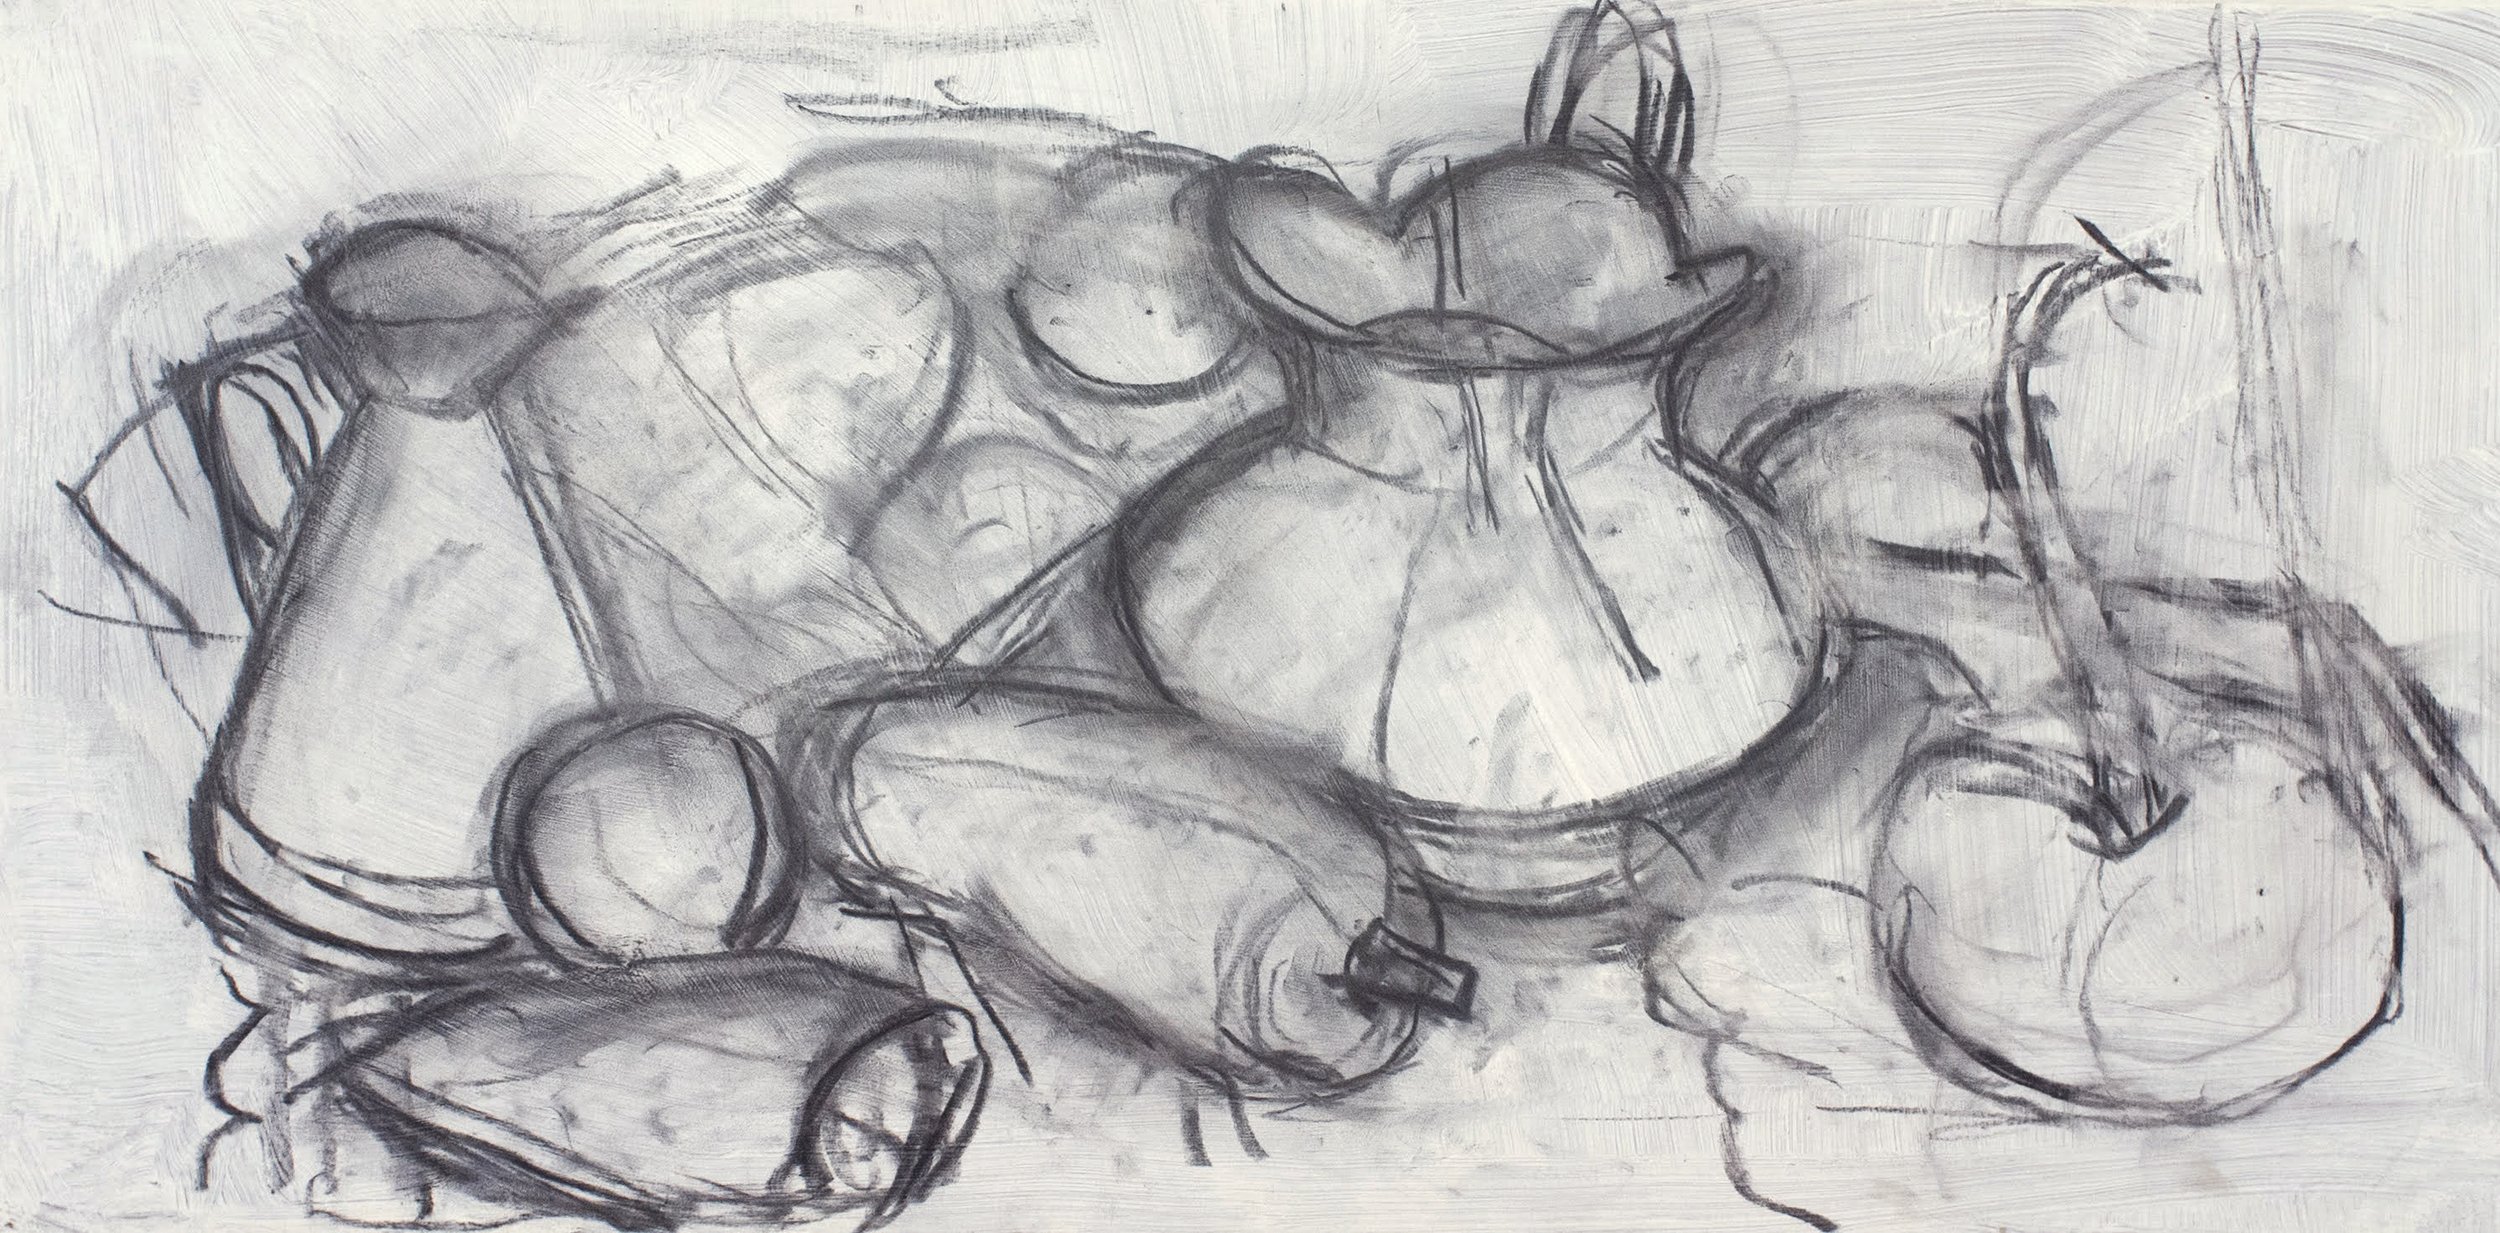   Bread, Two Pitchers, Yellow Squash and Lemons (study) , c. 2017, charcoal/panel unframed, 10 x 20 in. (Private collection) 